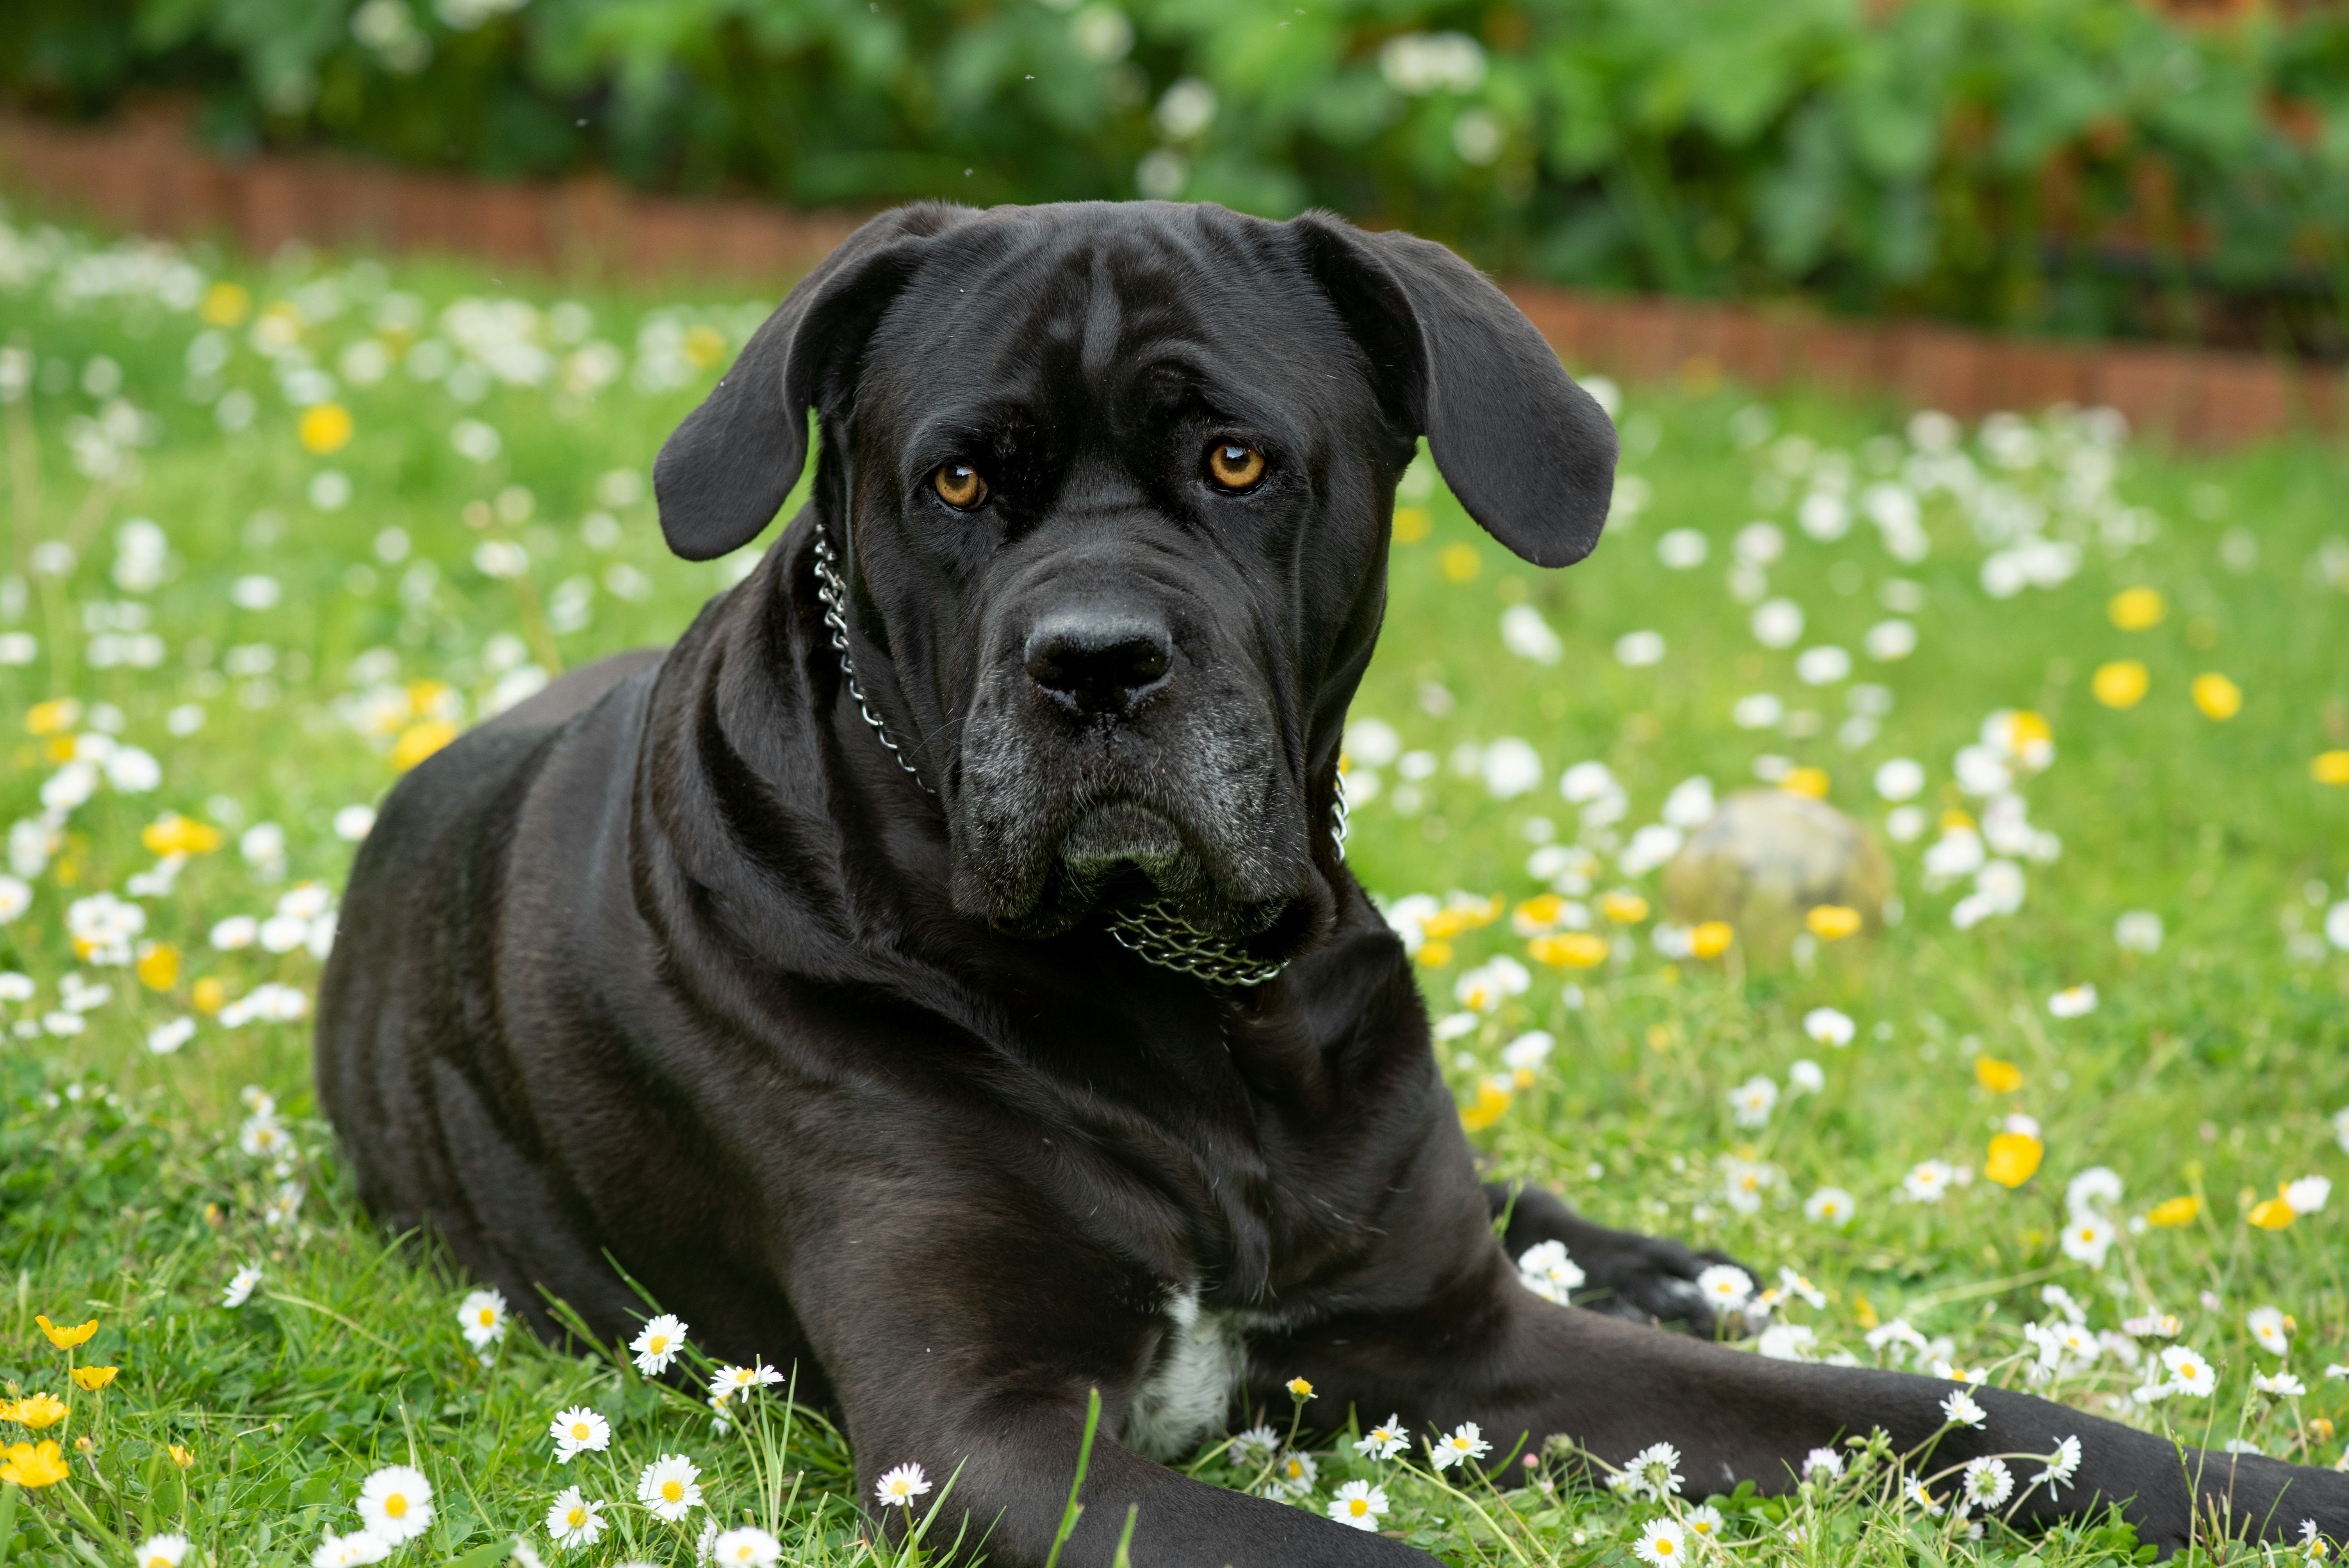 Large Breed, Black cane corso dog laying on the grass